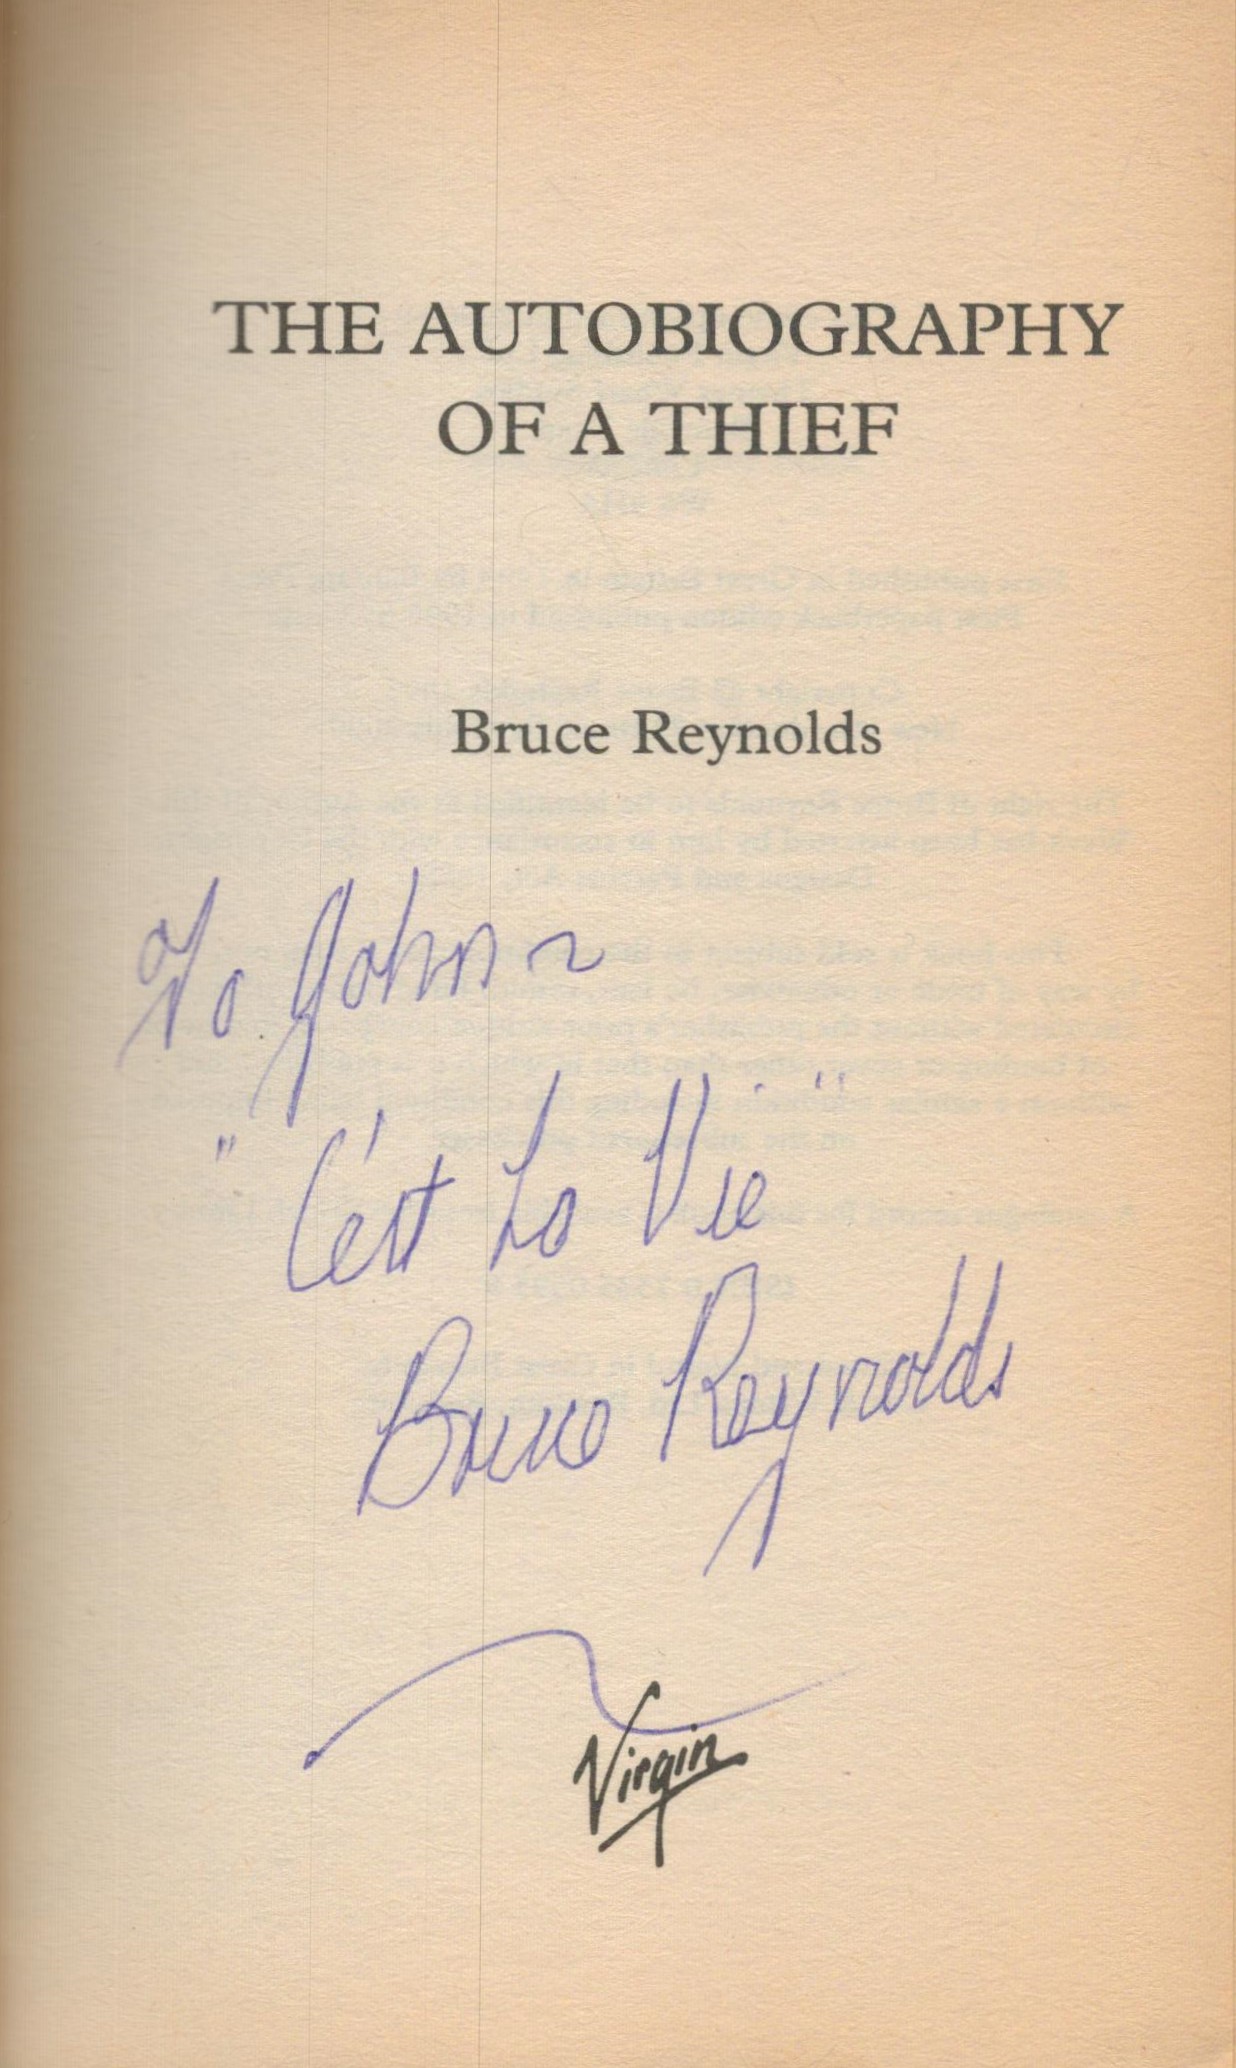 Bruce Reynolds signed The Autobiography of a thief paperback book. Good Condition. All autographs - Image 2 of 3